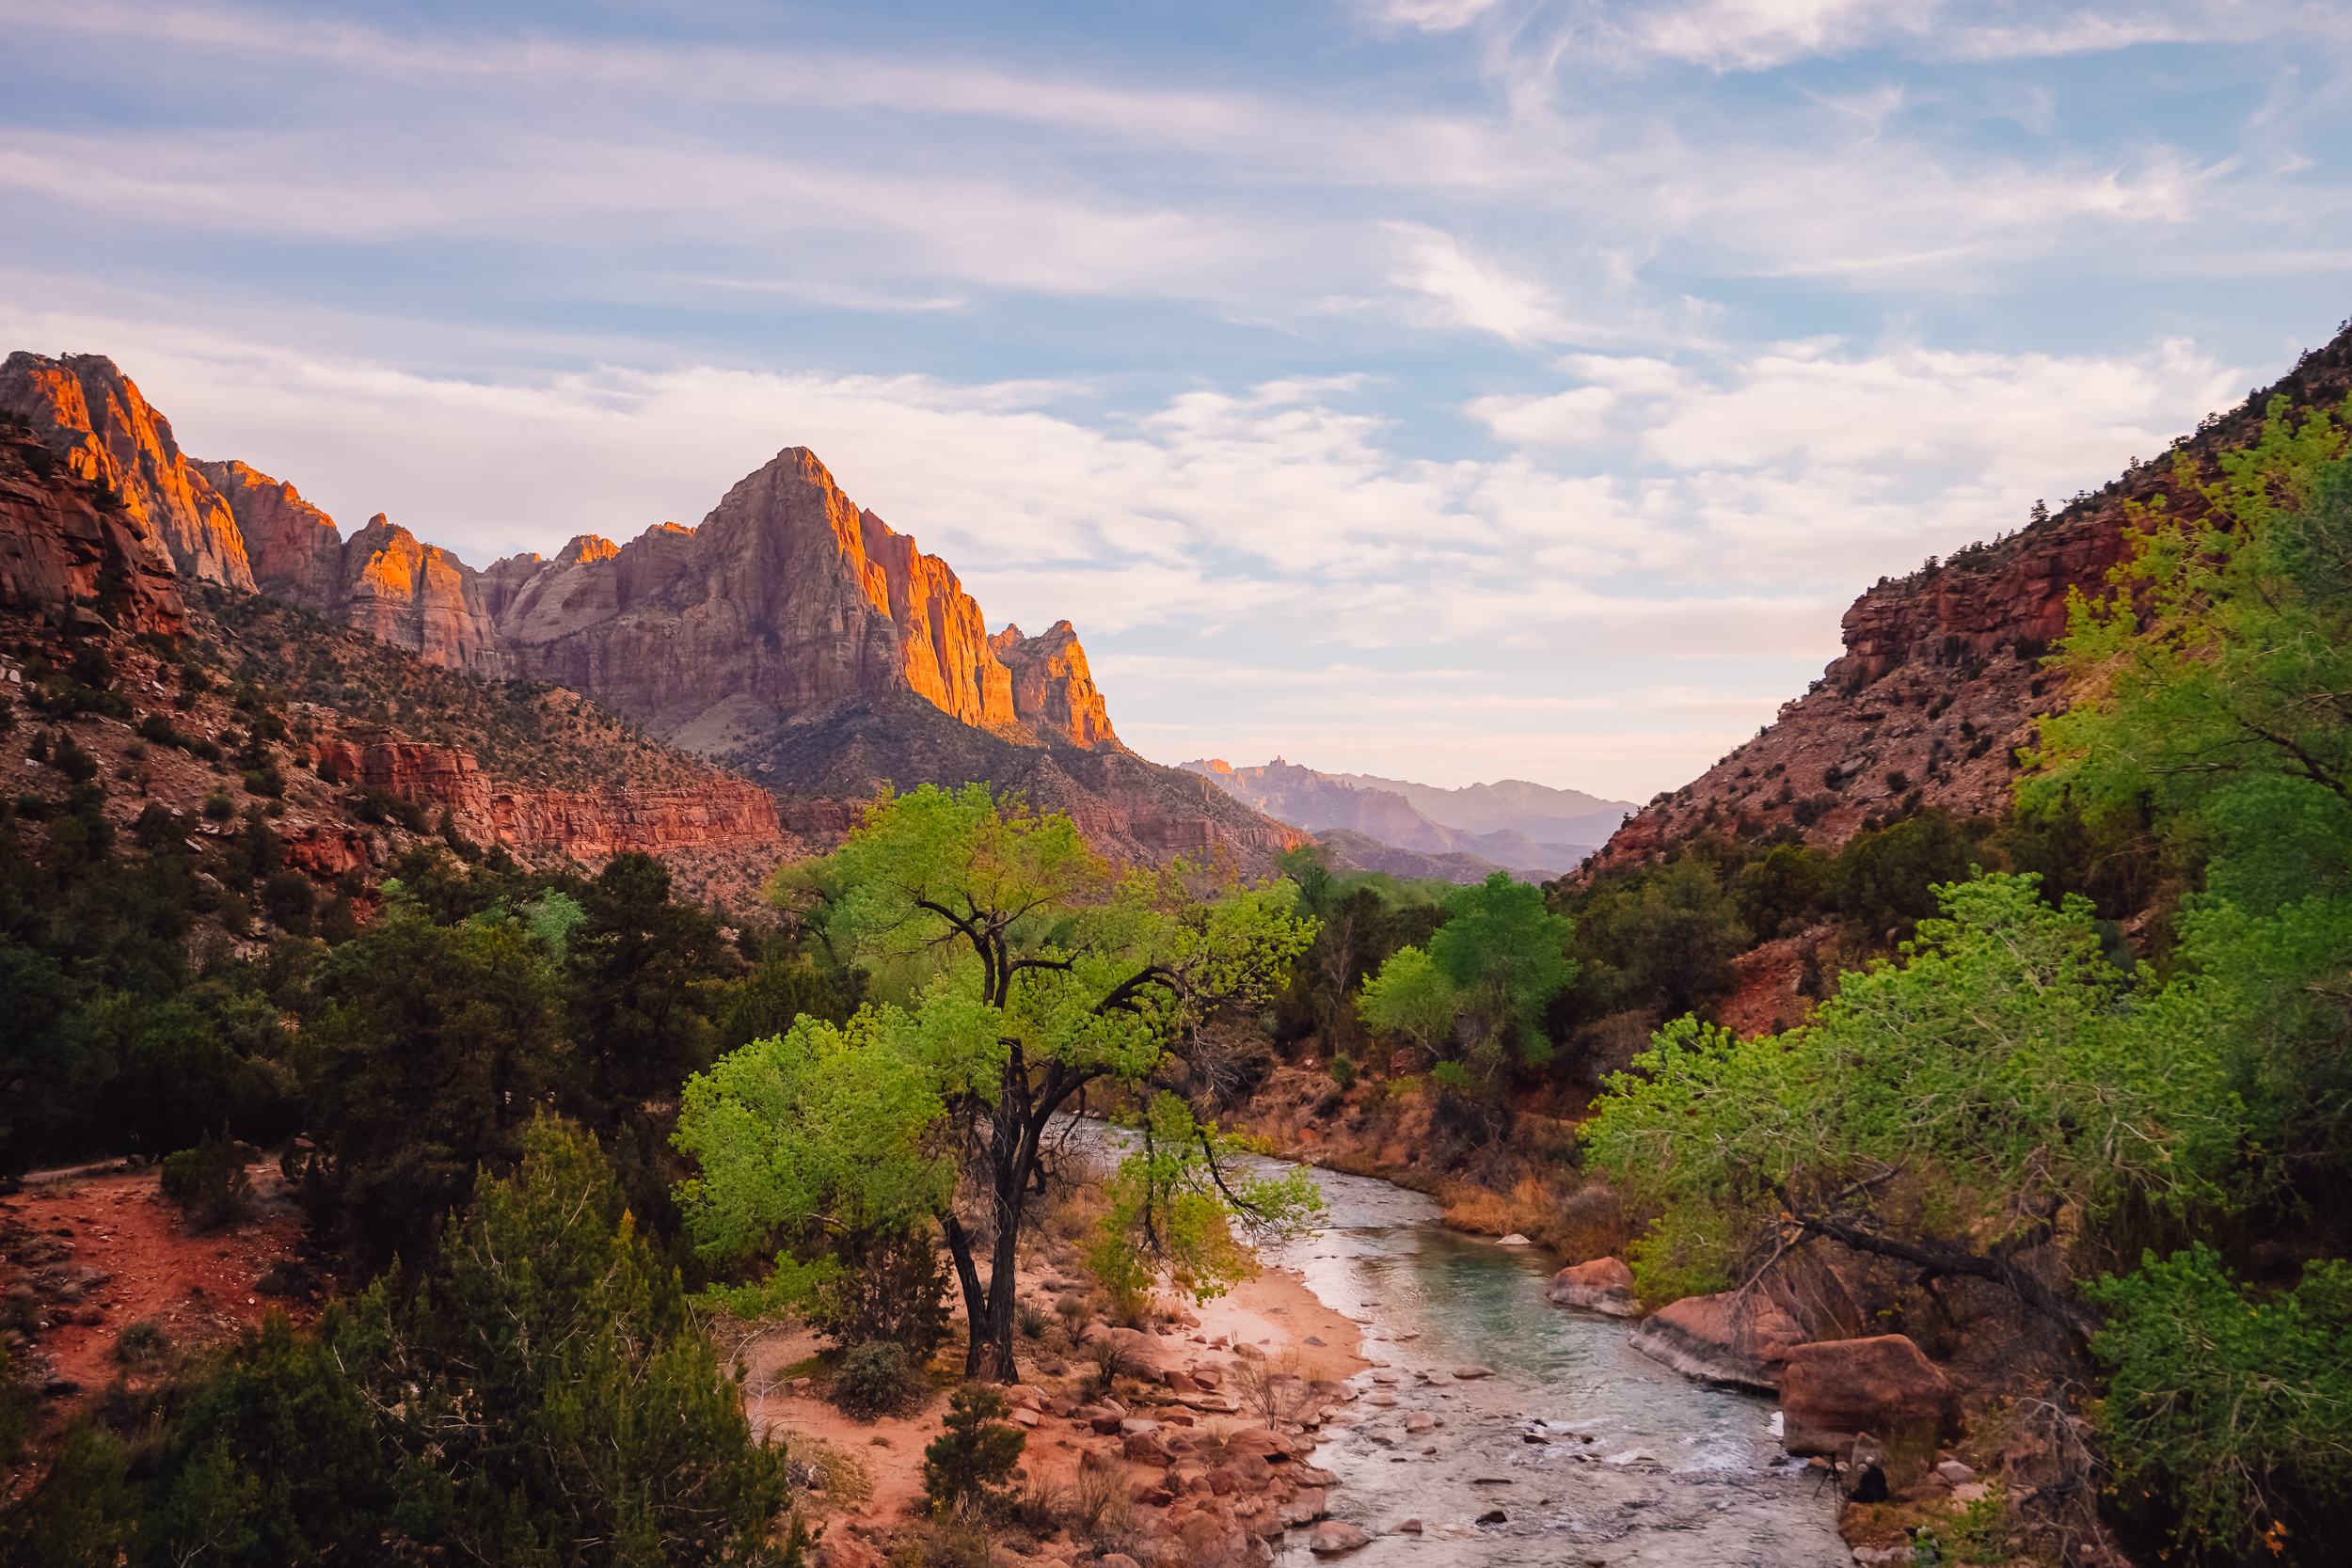 How to Plan a Trip to Zion National Park